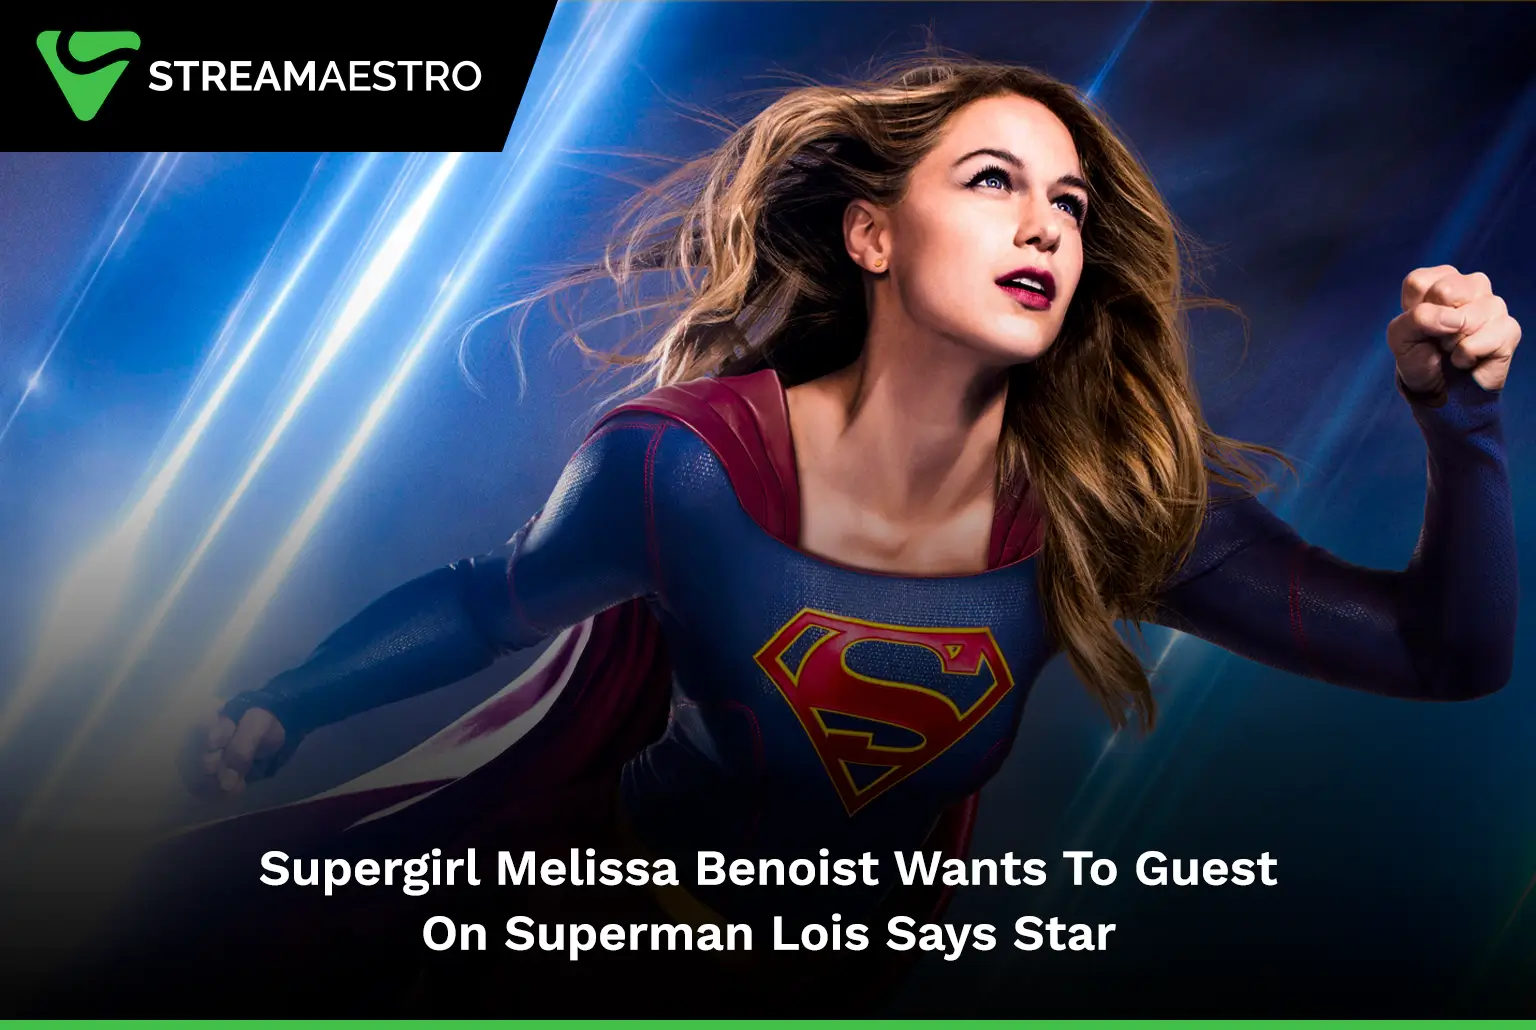 Supergirl's Melissa Benoist Wants To Guest On Superman & Lois, Says Star